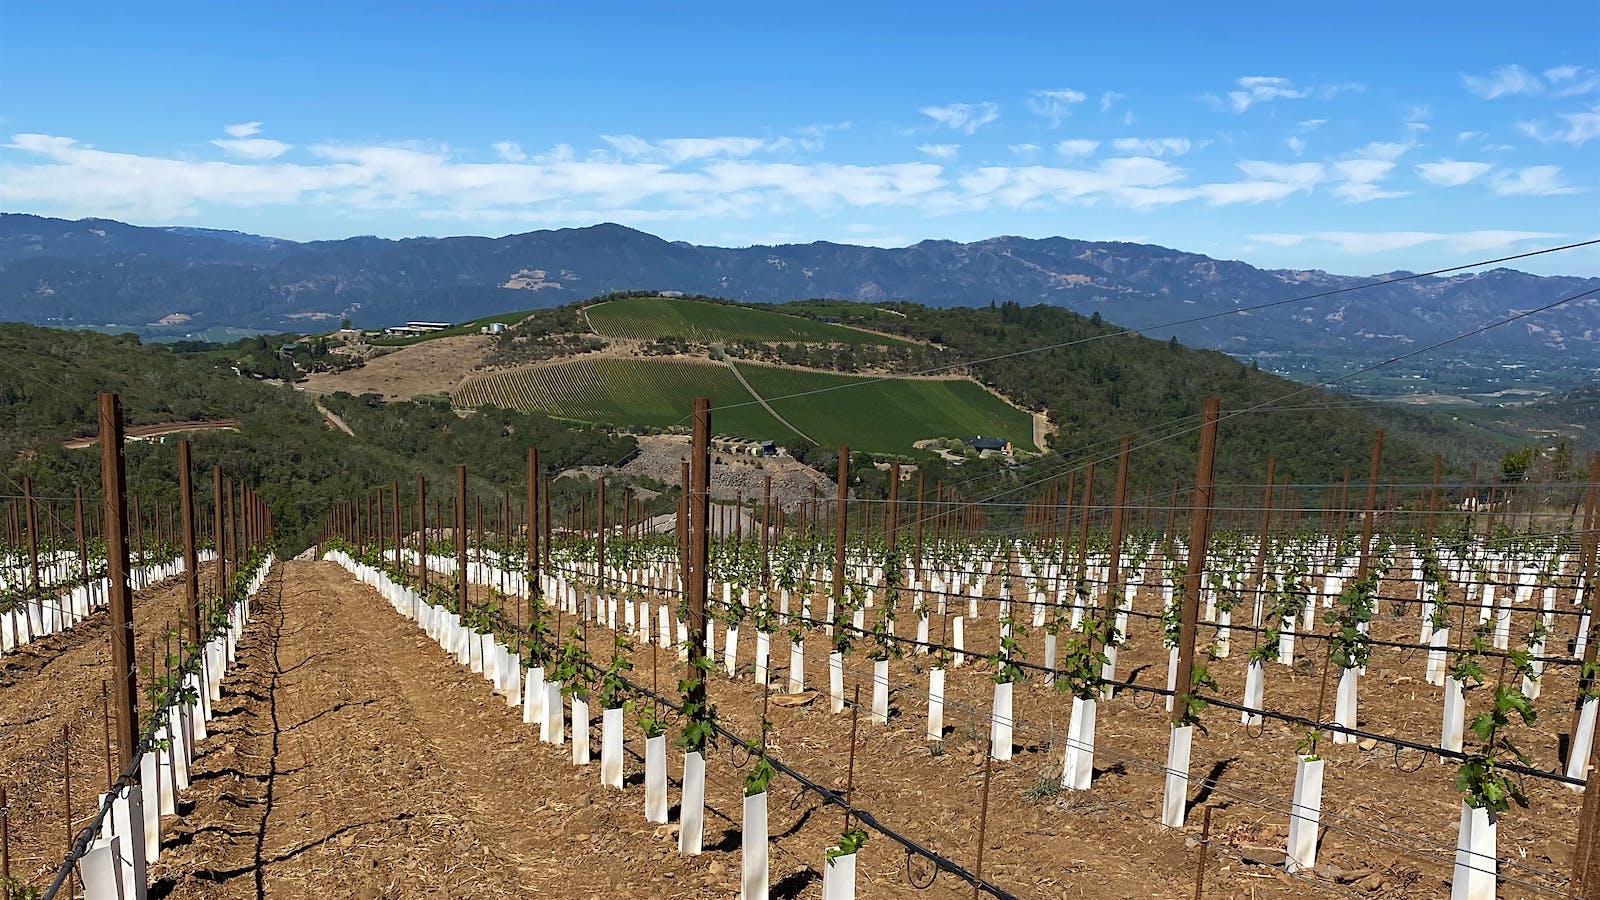 Promising 2019s and New Vines on the Horizon at Colgin Cellars